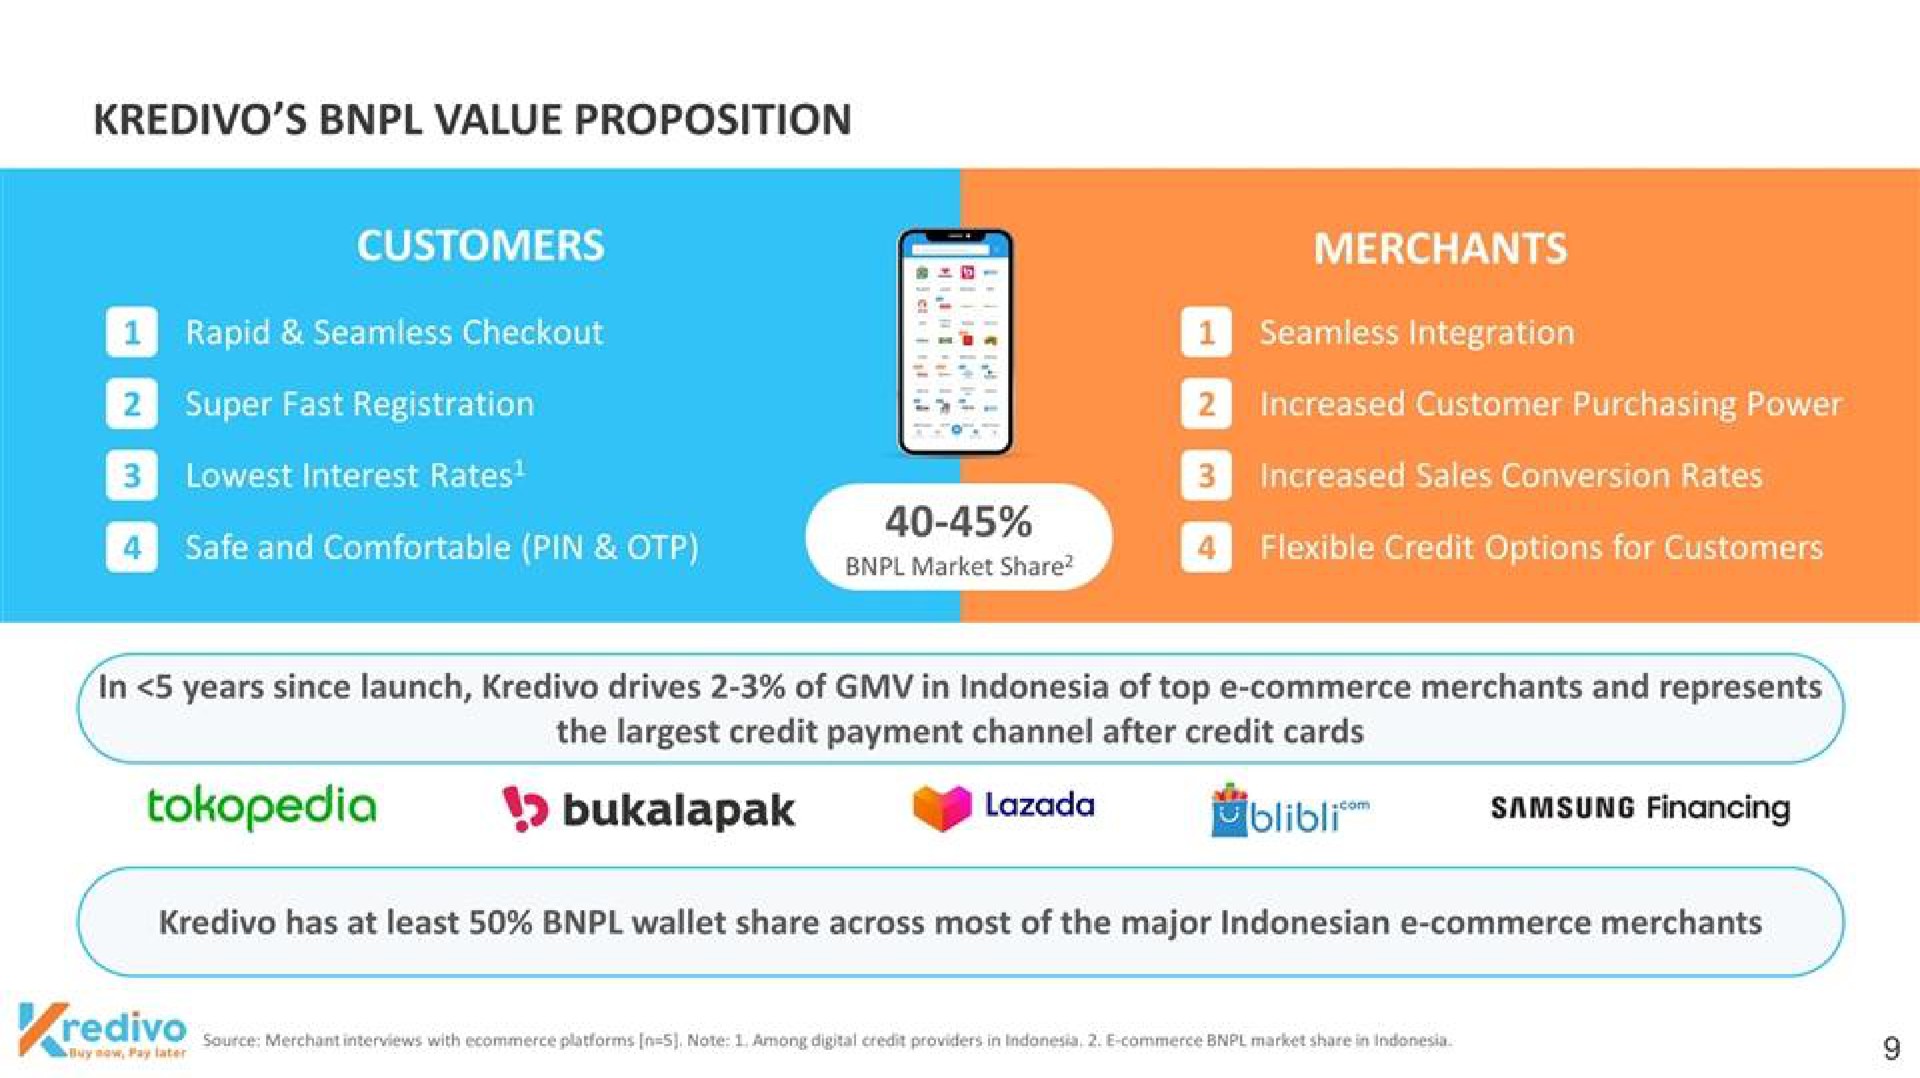 value proposition our super fast registration tate merchants a increased customer purchasing power | Kredivo